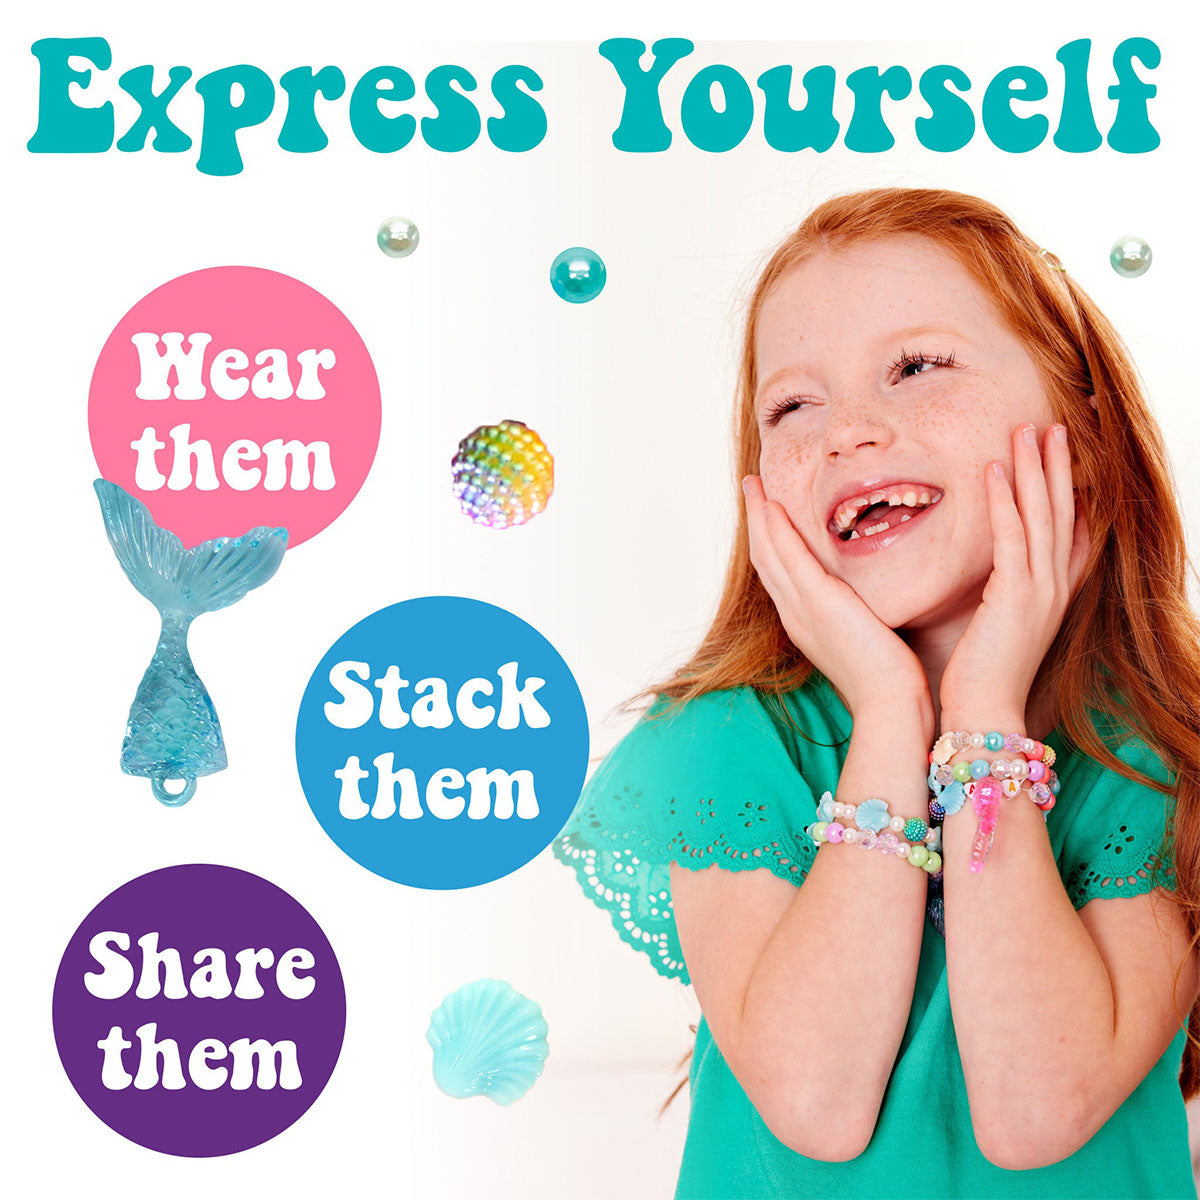 Express yourself. Wear them. Stack them. Share them. Smiling girl wearing Unicorn Bead Jewelry by Creativity for Kids.